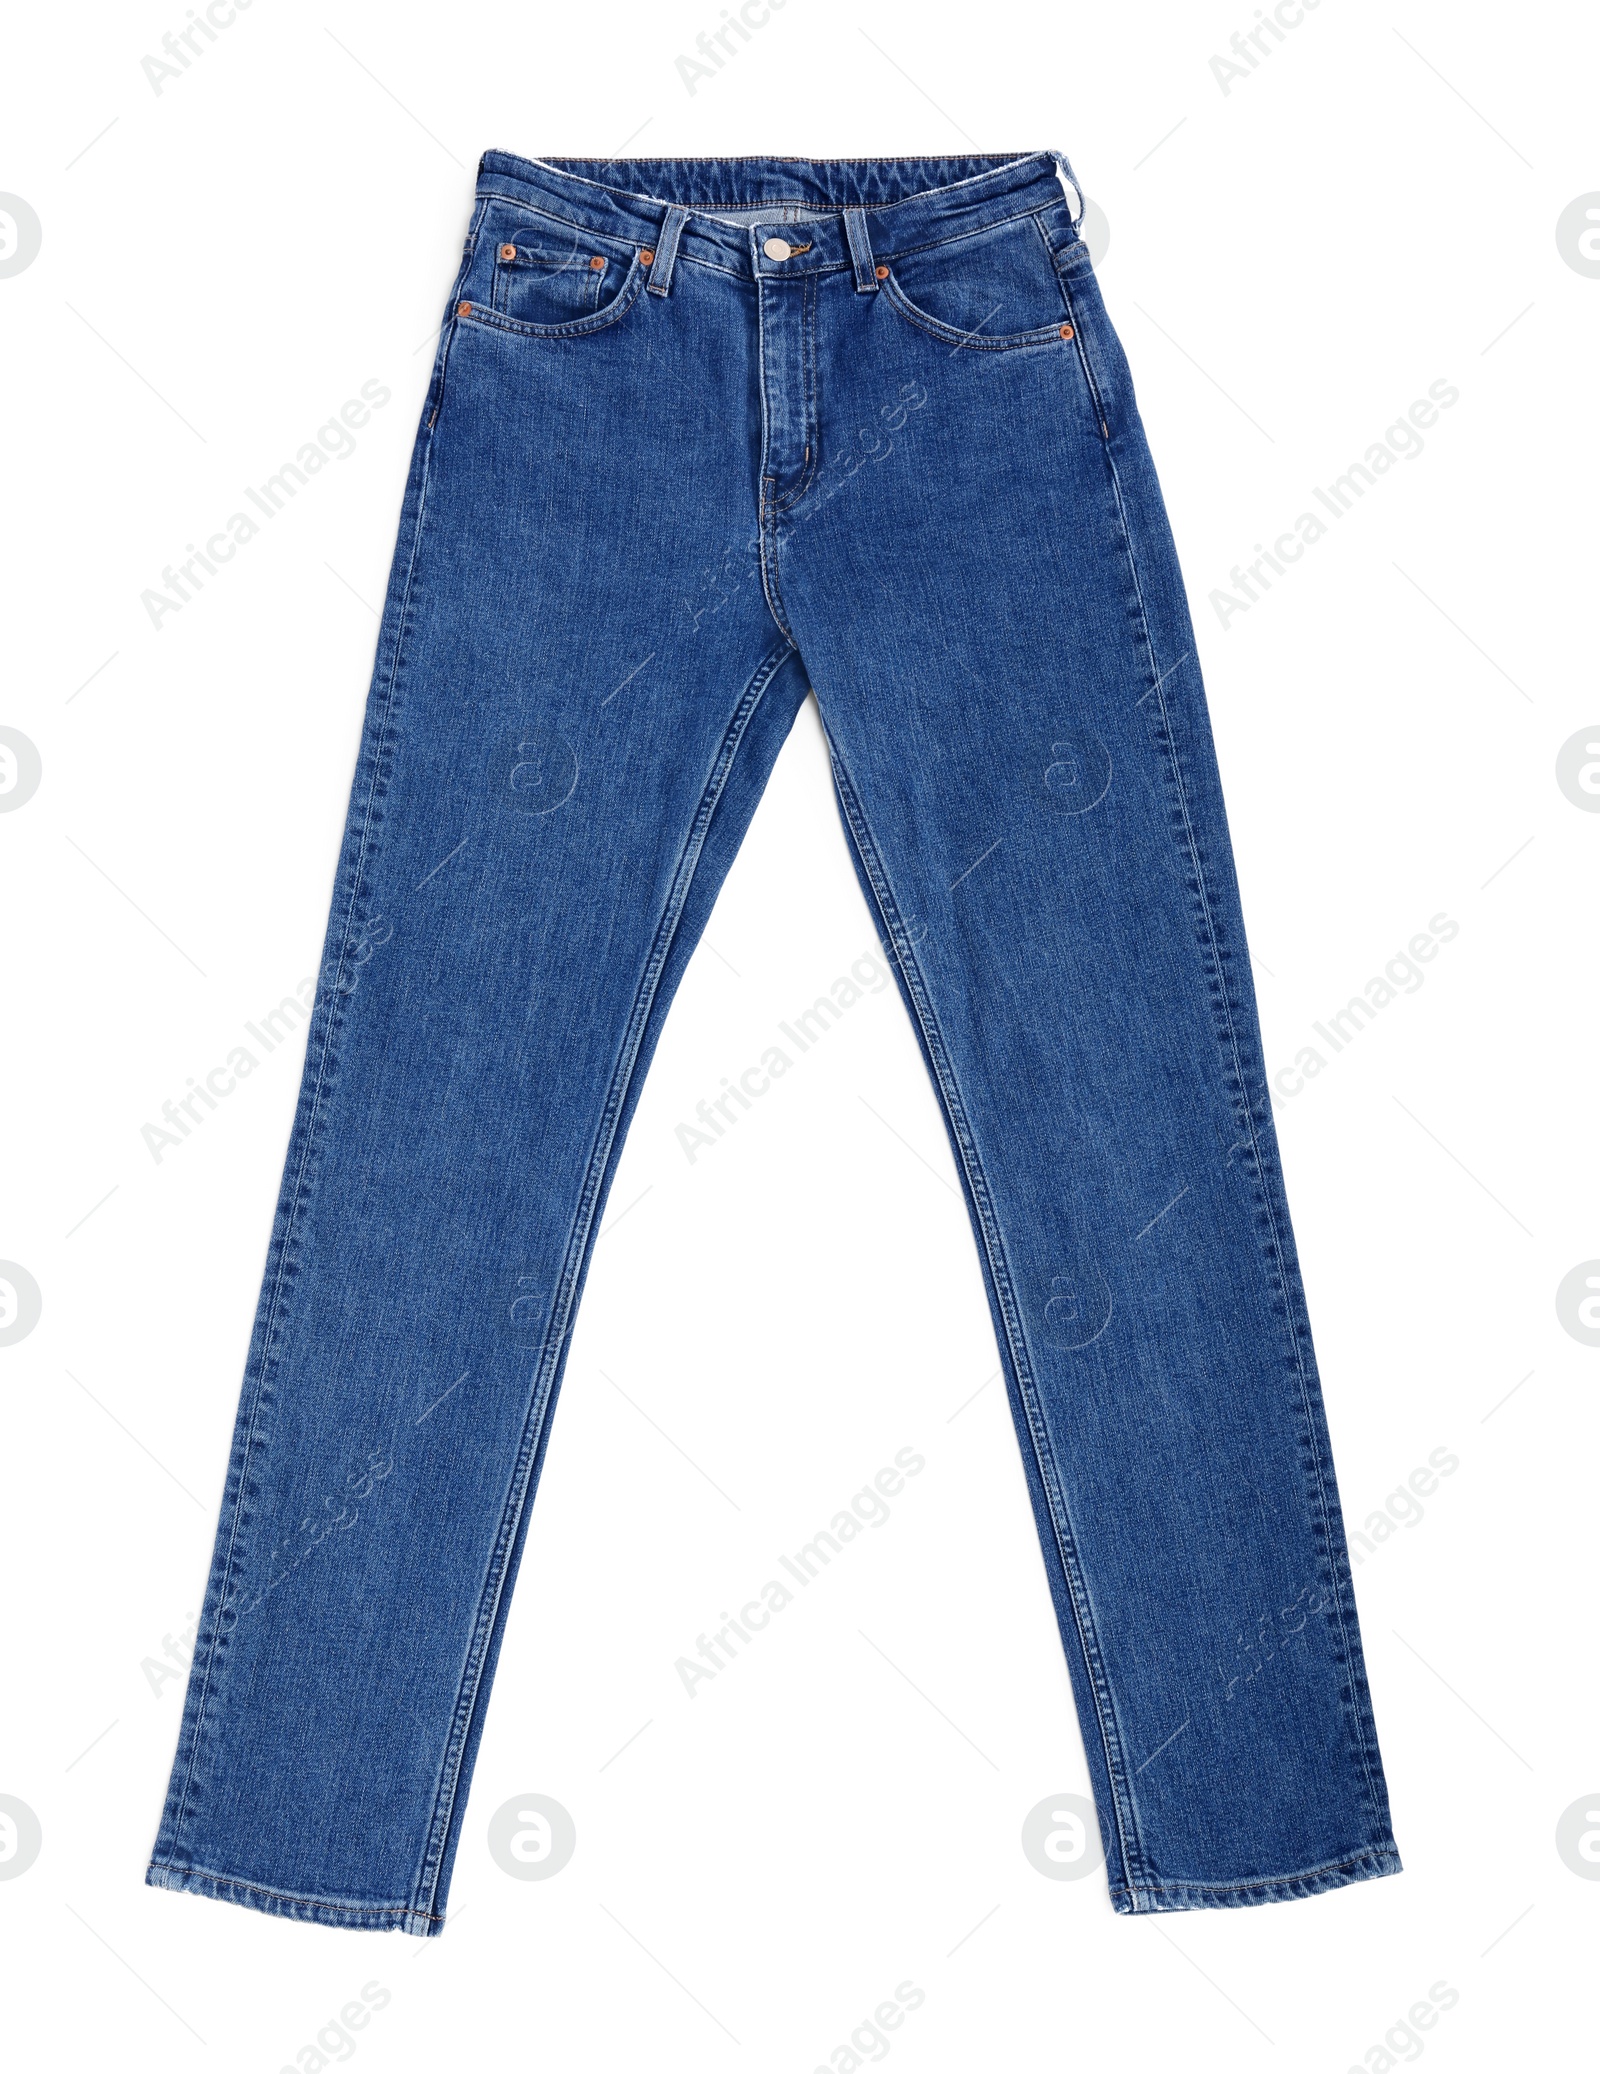 Photo of Dark blue jeans isolated on white, top view. Stylish clothes